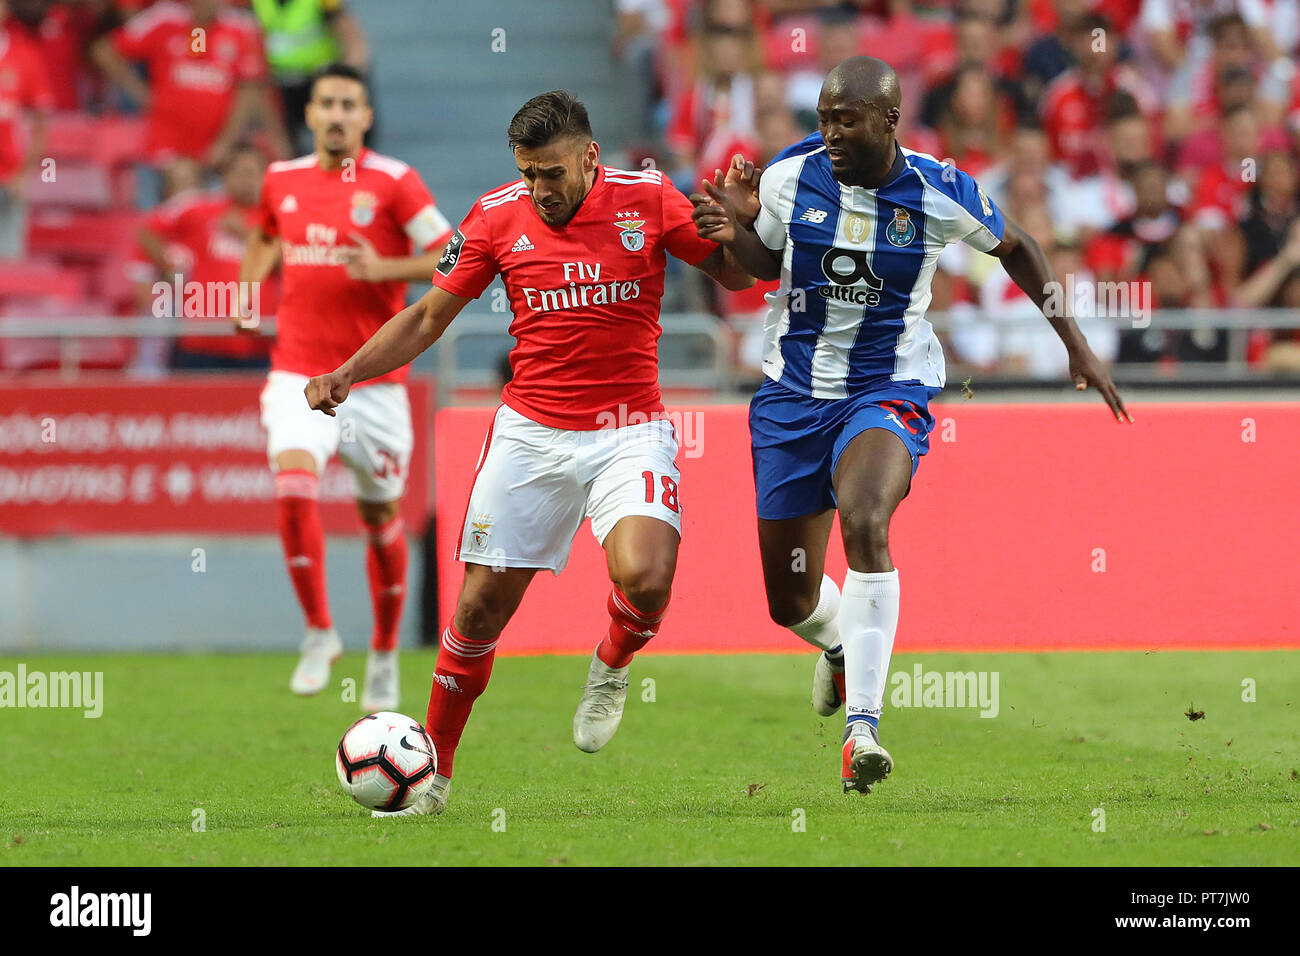 Lisbon, Portugal, Portugal. 7th Oct, 2018. Toto Salvio of SL Benfica (L)  with Danilo Pereira of FC Porto (R) seen in action during League NOS  2018/19 football match between SL Benfica vs